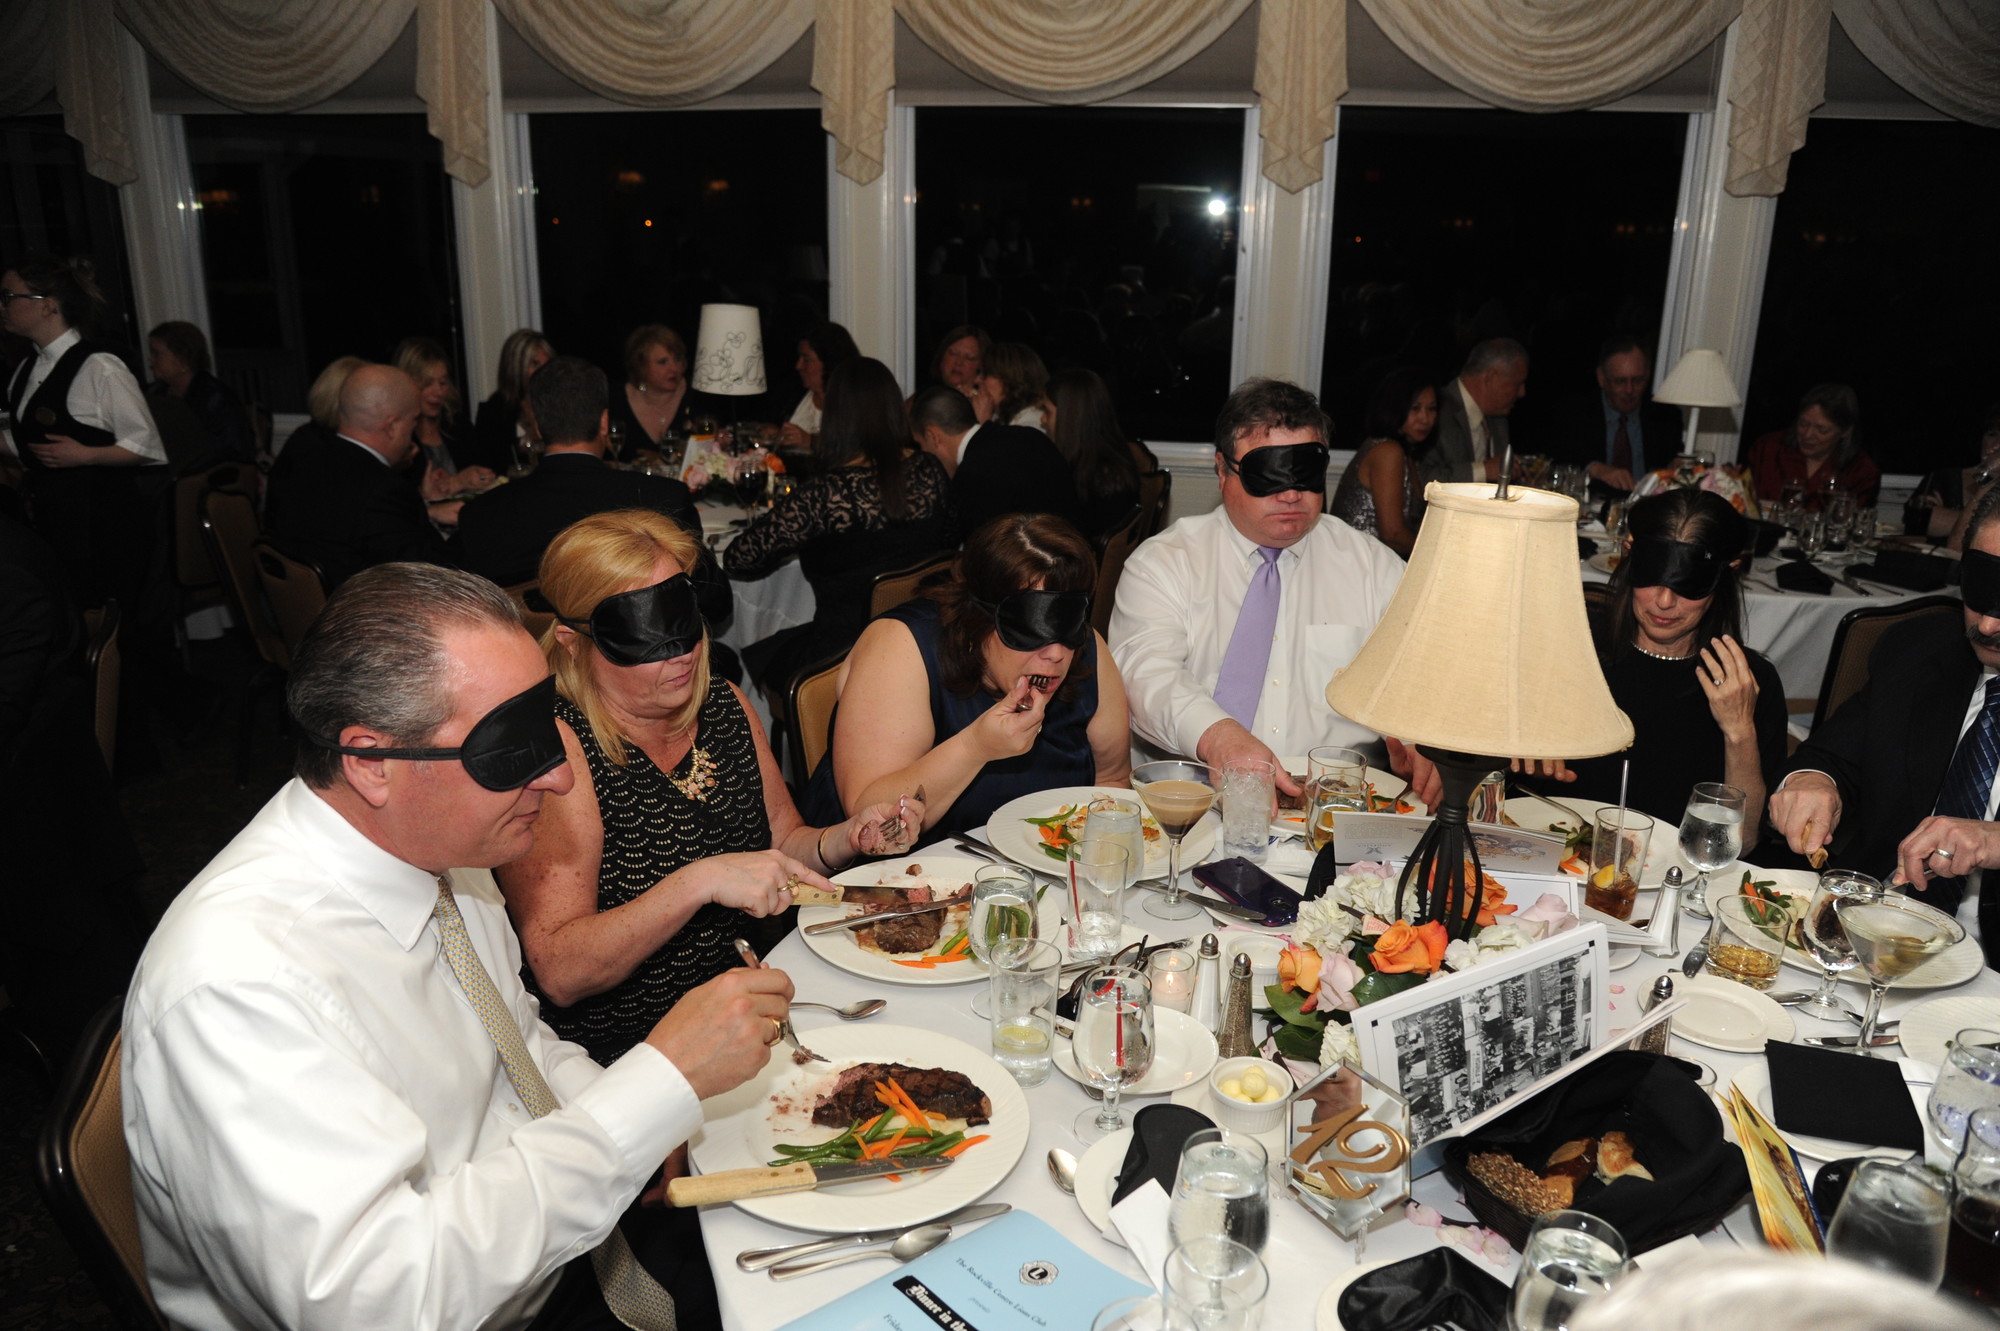 Guests experienced how difficult eating a meal was for people with vision impairments.